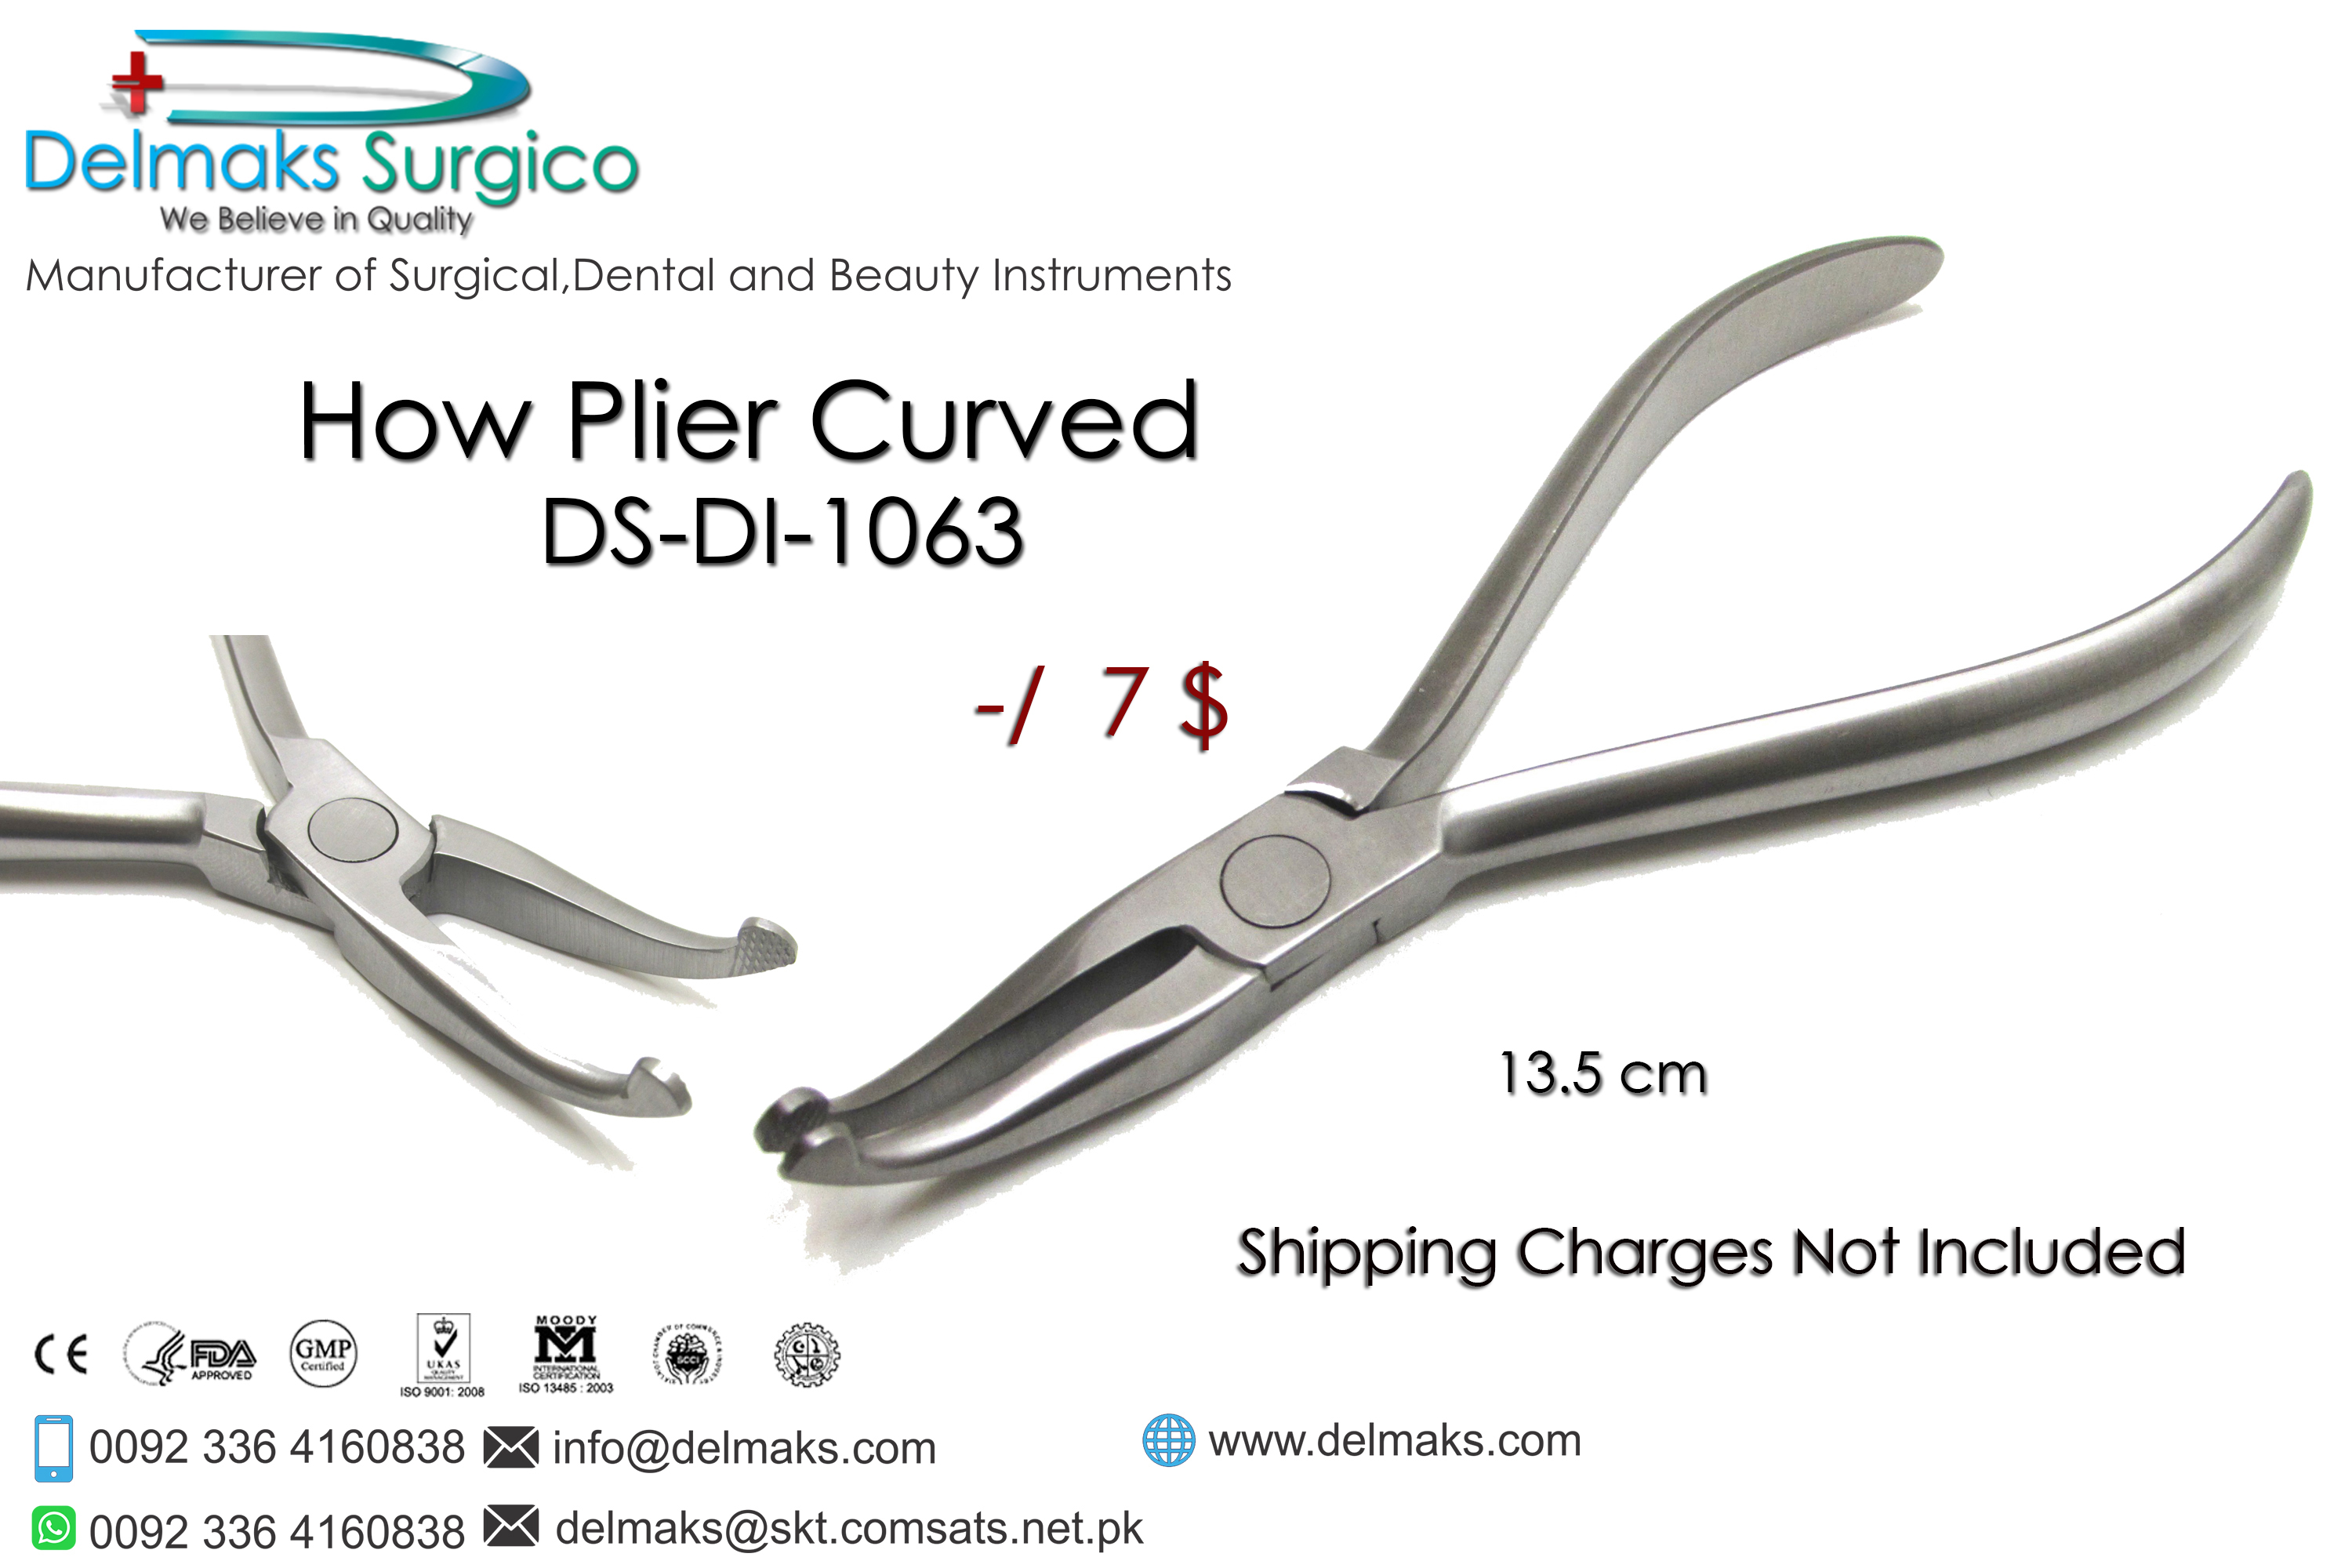 How Plier Curved-Orthodontic Pliers-Orthodontic Instruments-Dental Instruments-Delmaks Surgico